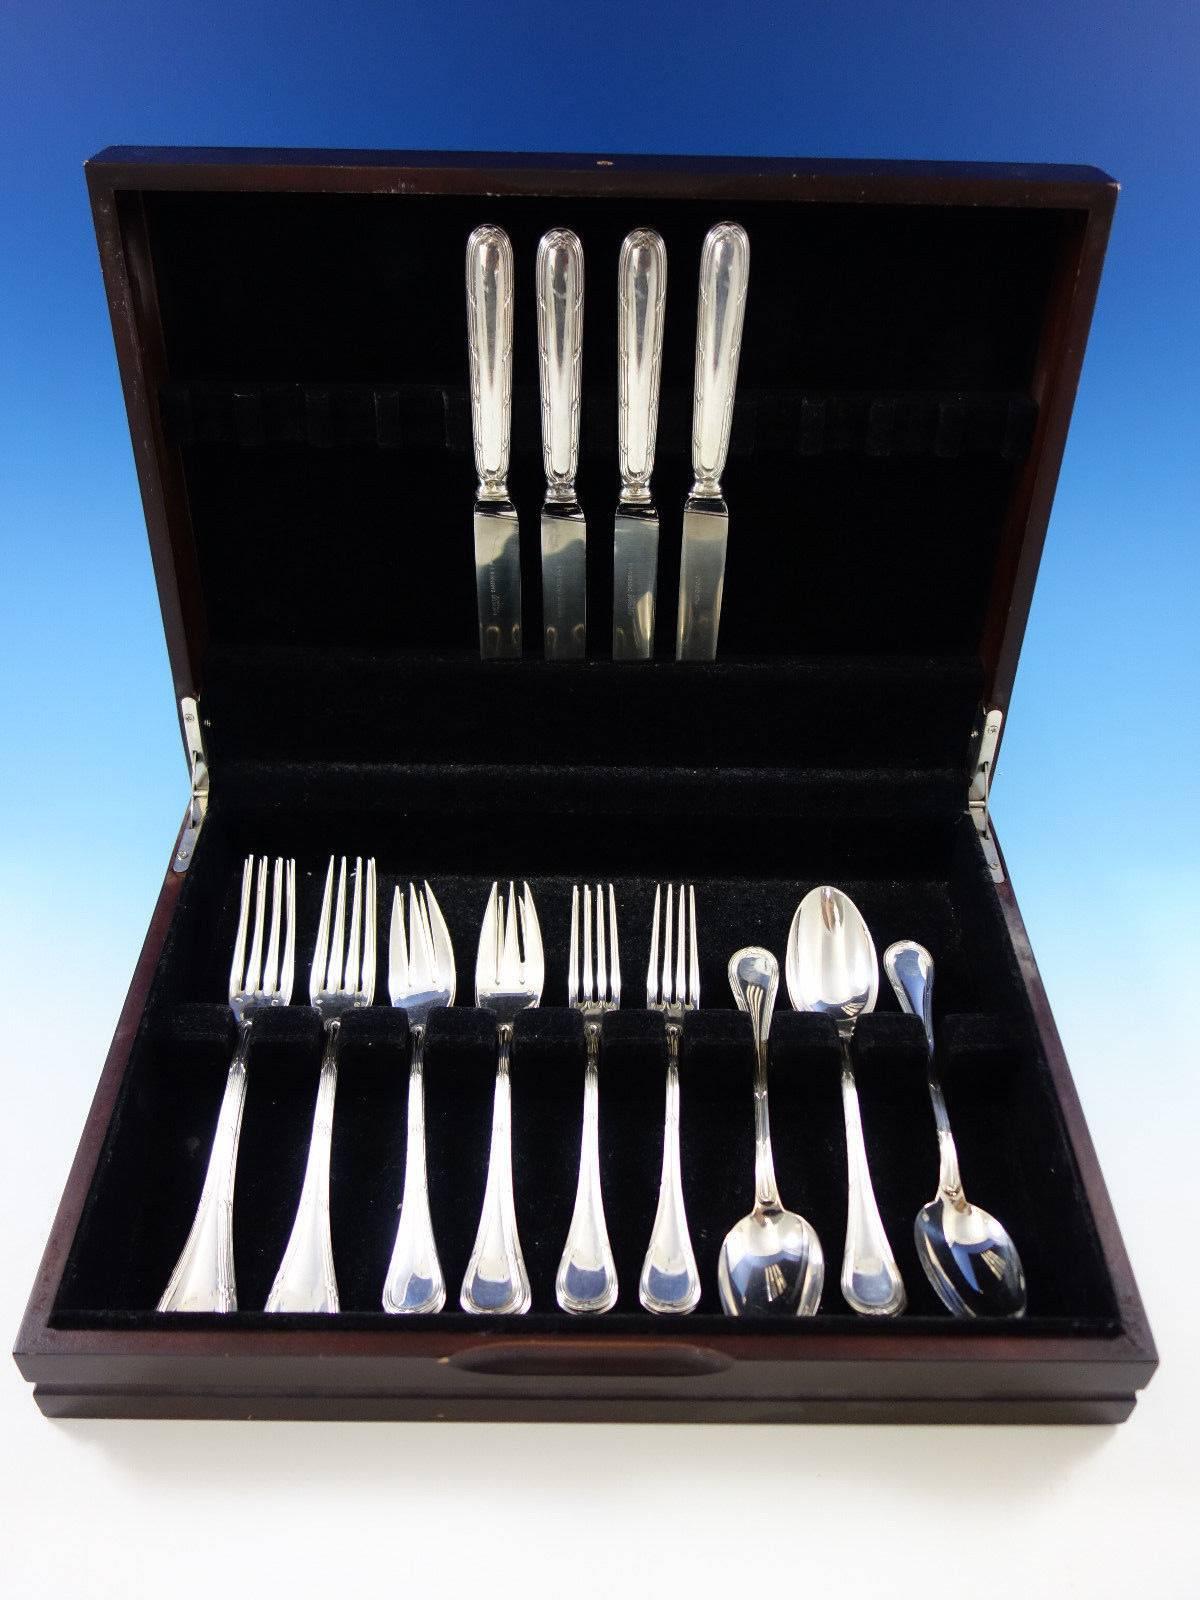 Scarce dinner size Bougainville by Puiforcat France, retailed by Cartier, sterling silver flatware set of 20 pieces. Great starter set! This set includes: 

Four dinner size knives, 9 1/2